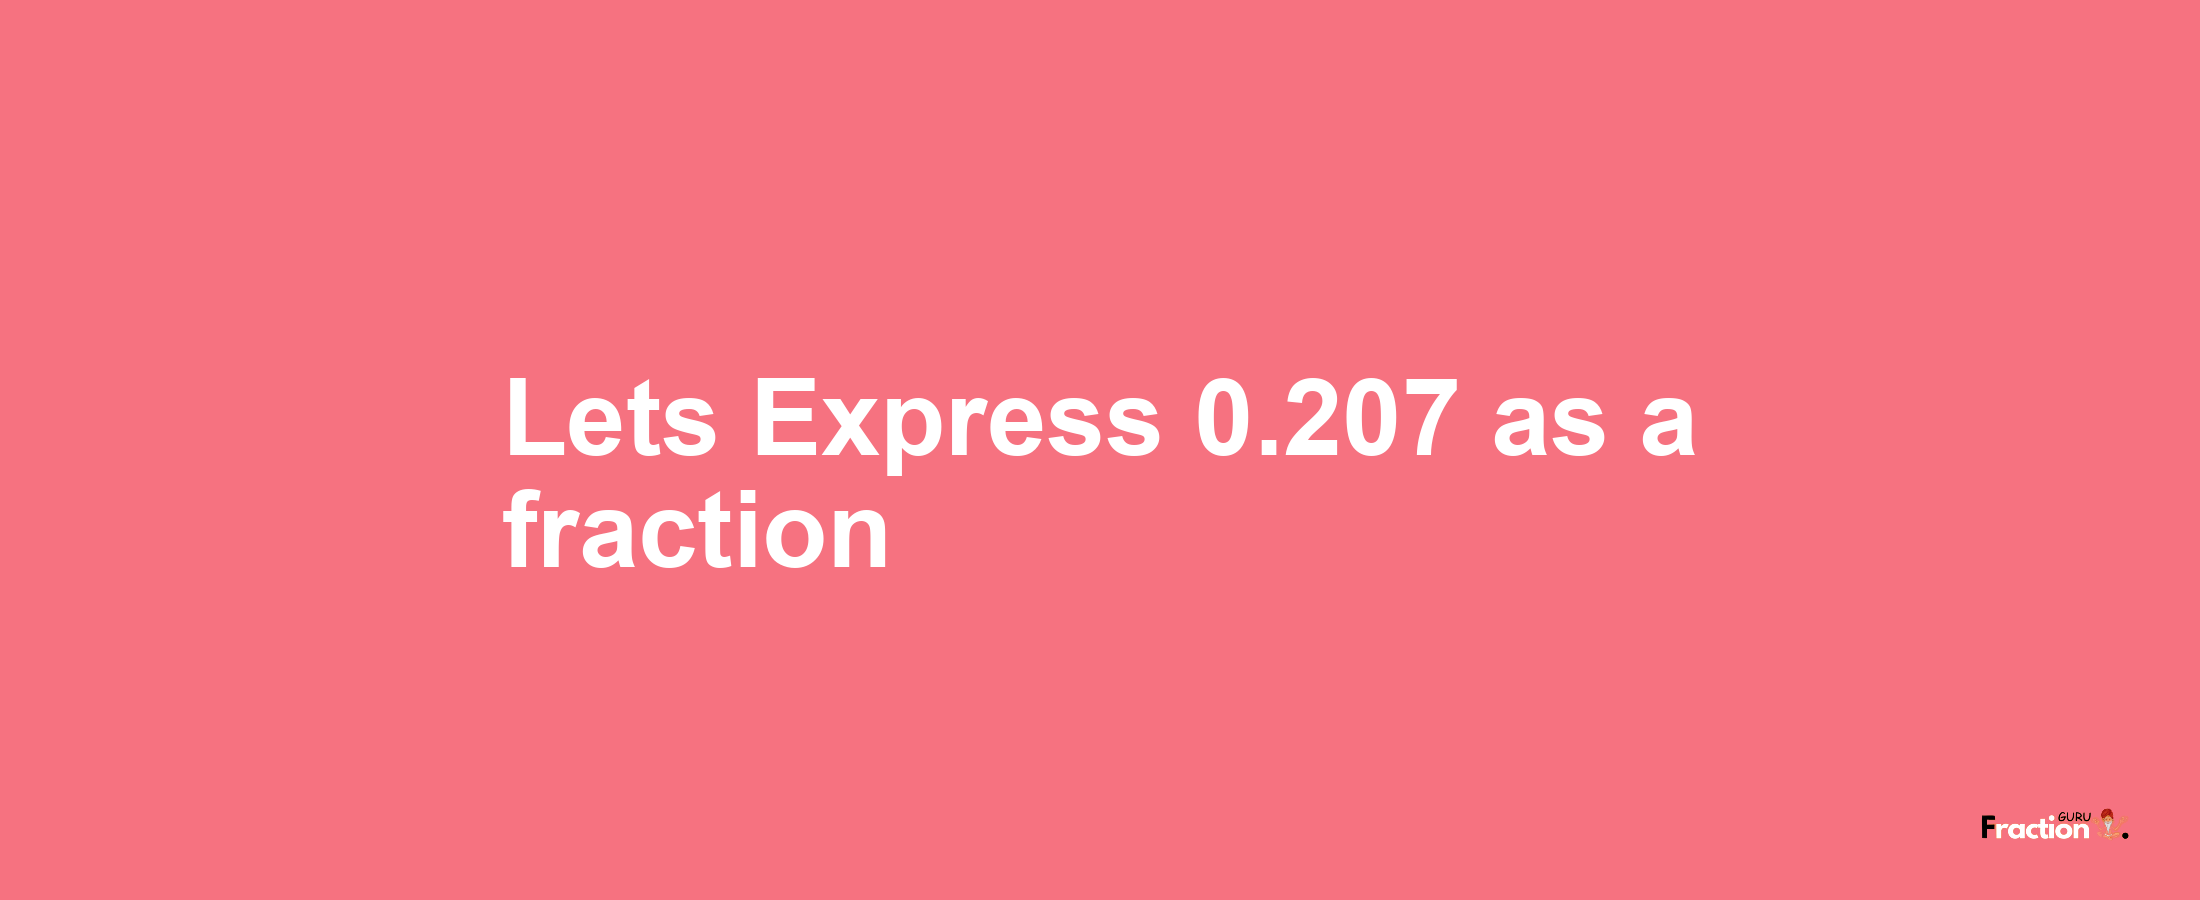 Lets Express 0.207 as afraction